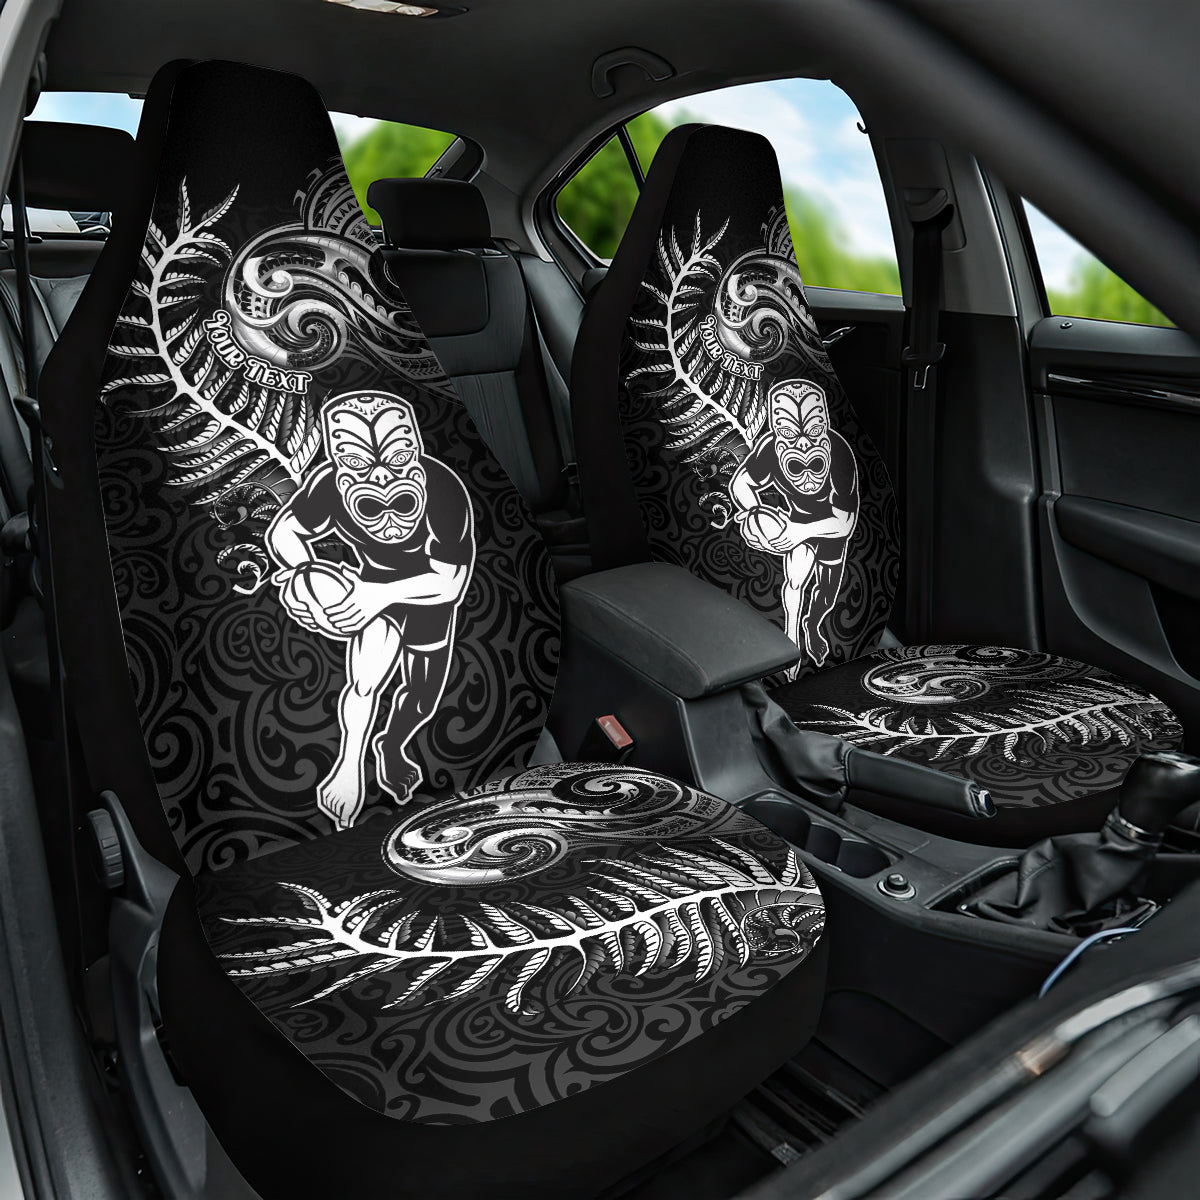 Personalised New Zealand Rugby Car Seat Cover Maori Warrior Rugby with Silver Fern Sleeve Tribal Ethnic Style LT03 One Size Black - Polynesian Pride